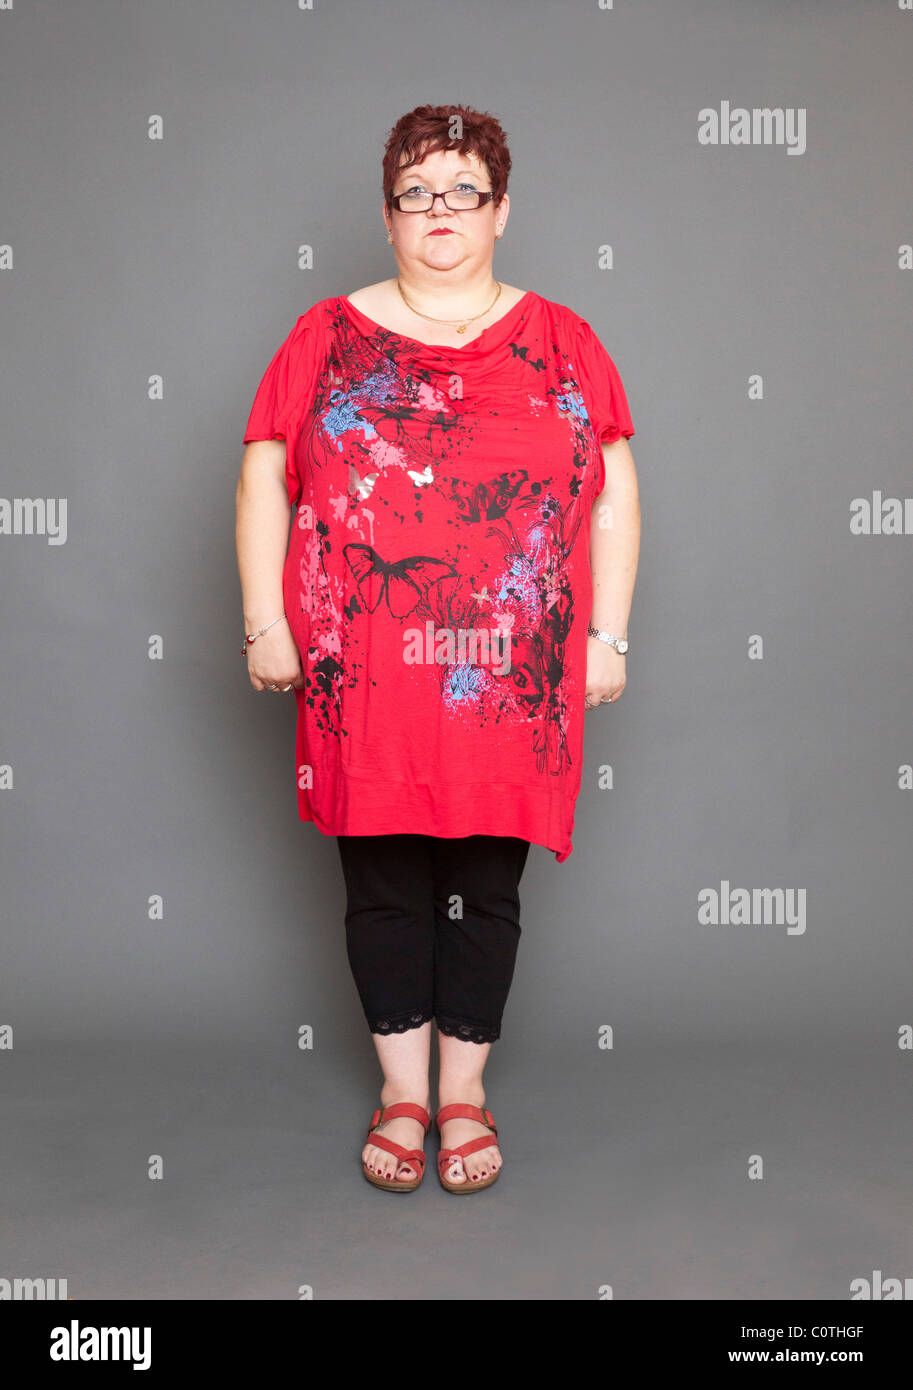 overweight woman standing upright Stock Photo Alamy